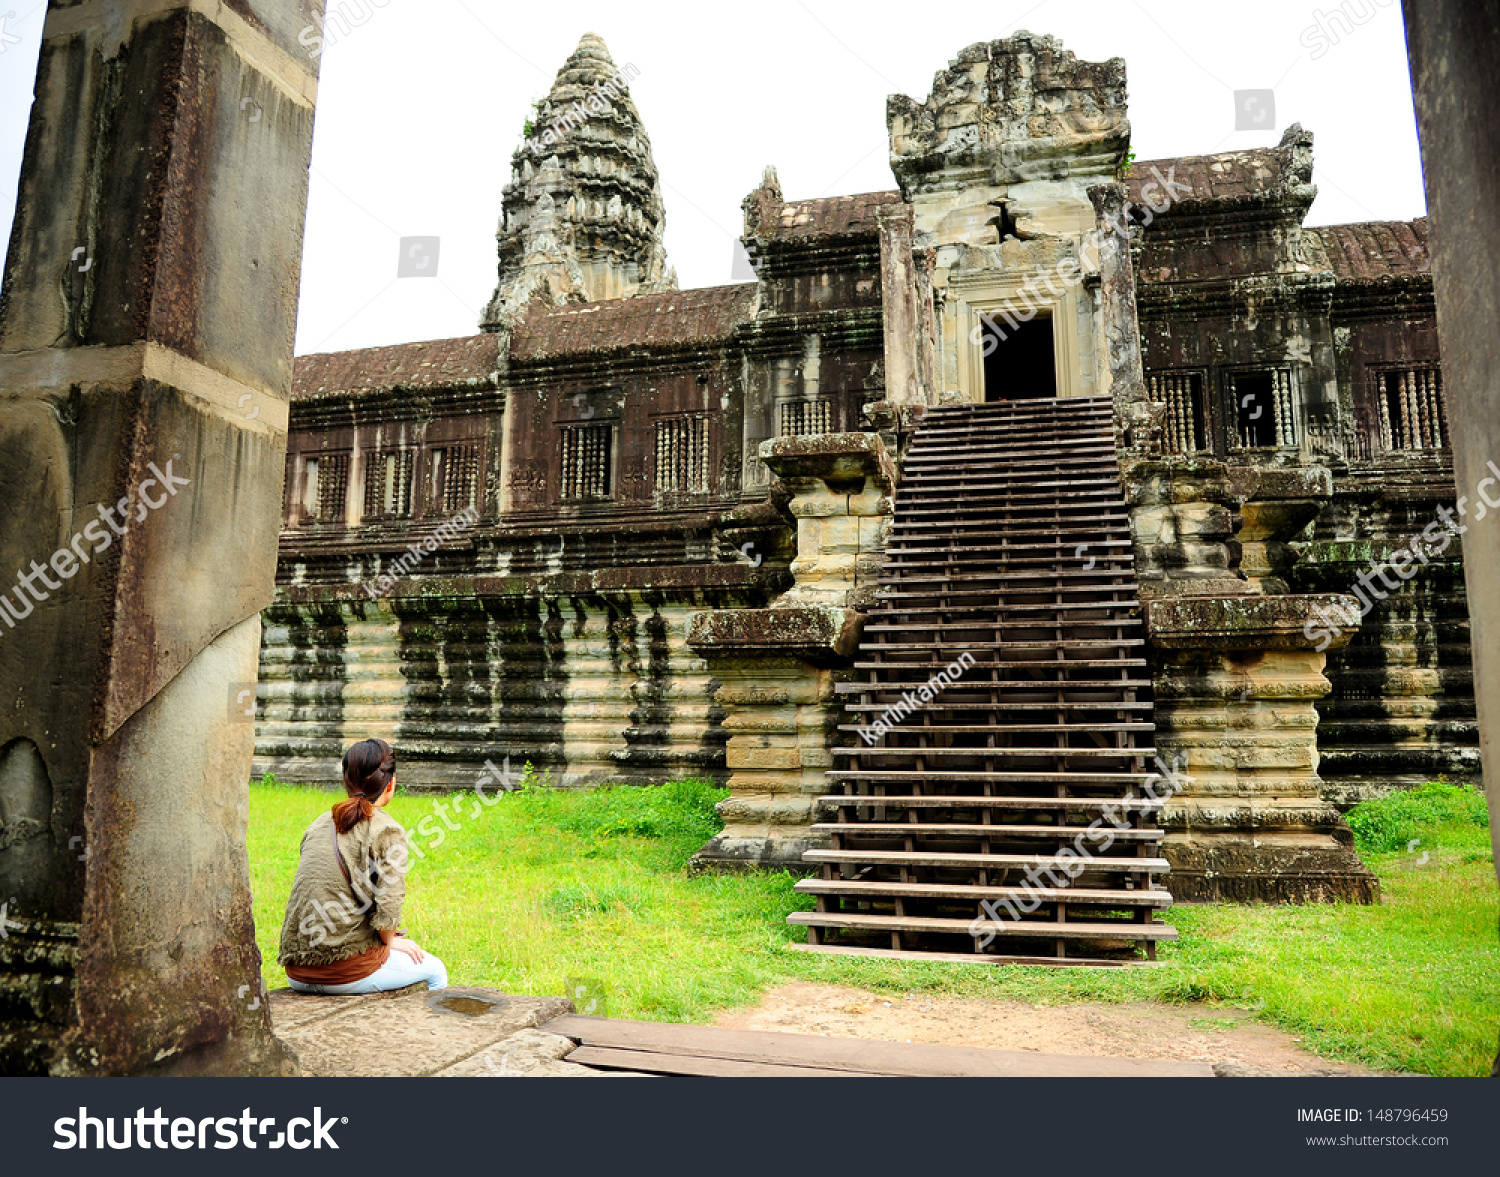 Lonely Girl in Angkor Wat Temple, Cambodia  #148796459